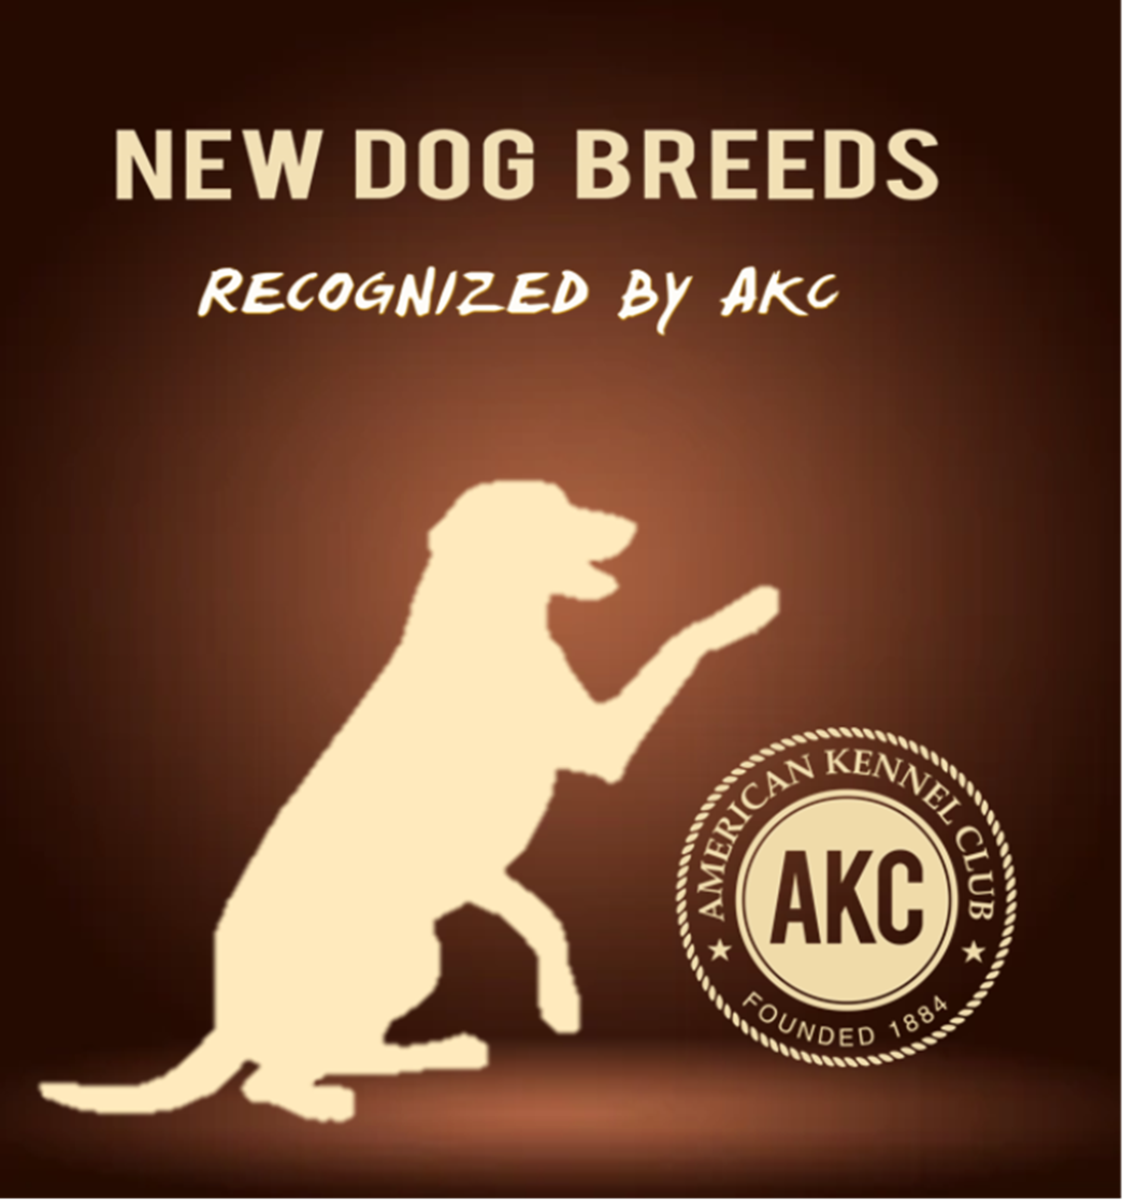 11 Newest Dog Breeds Recognized by AKC Till 2016